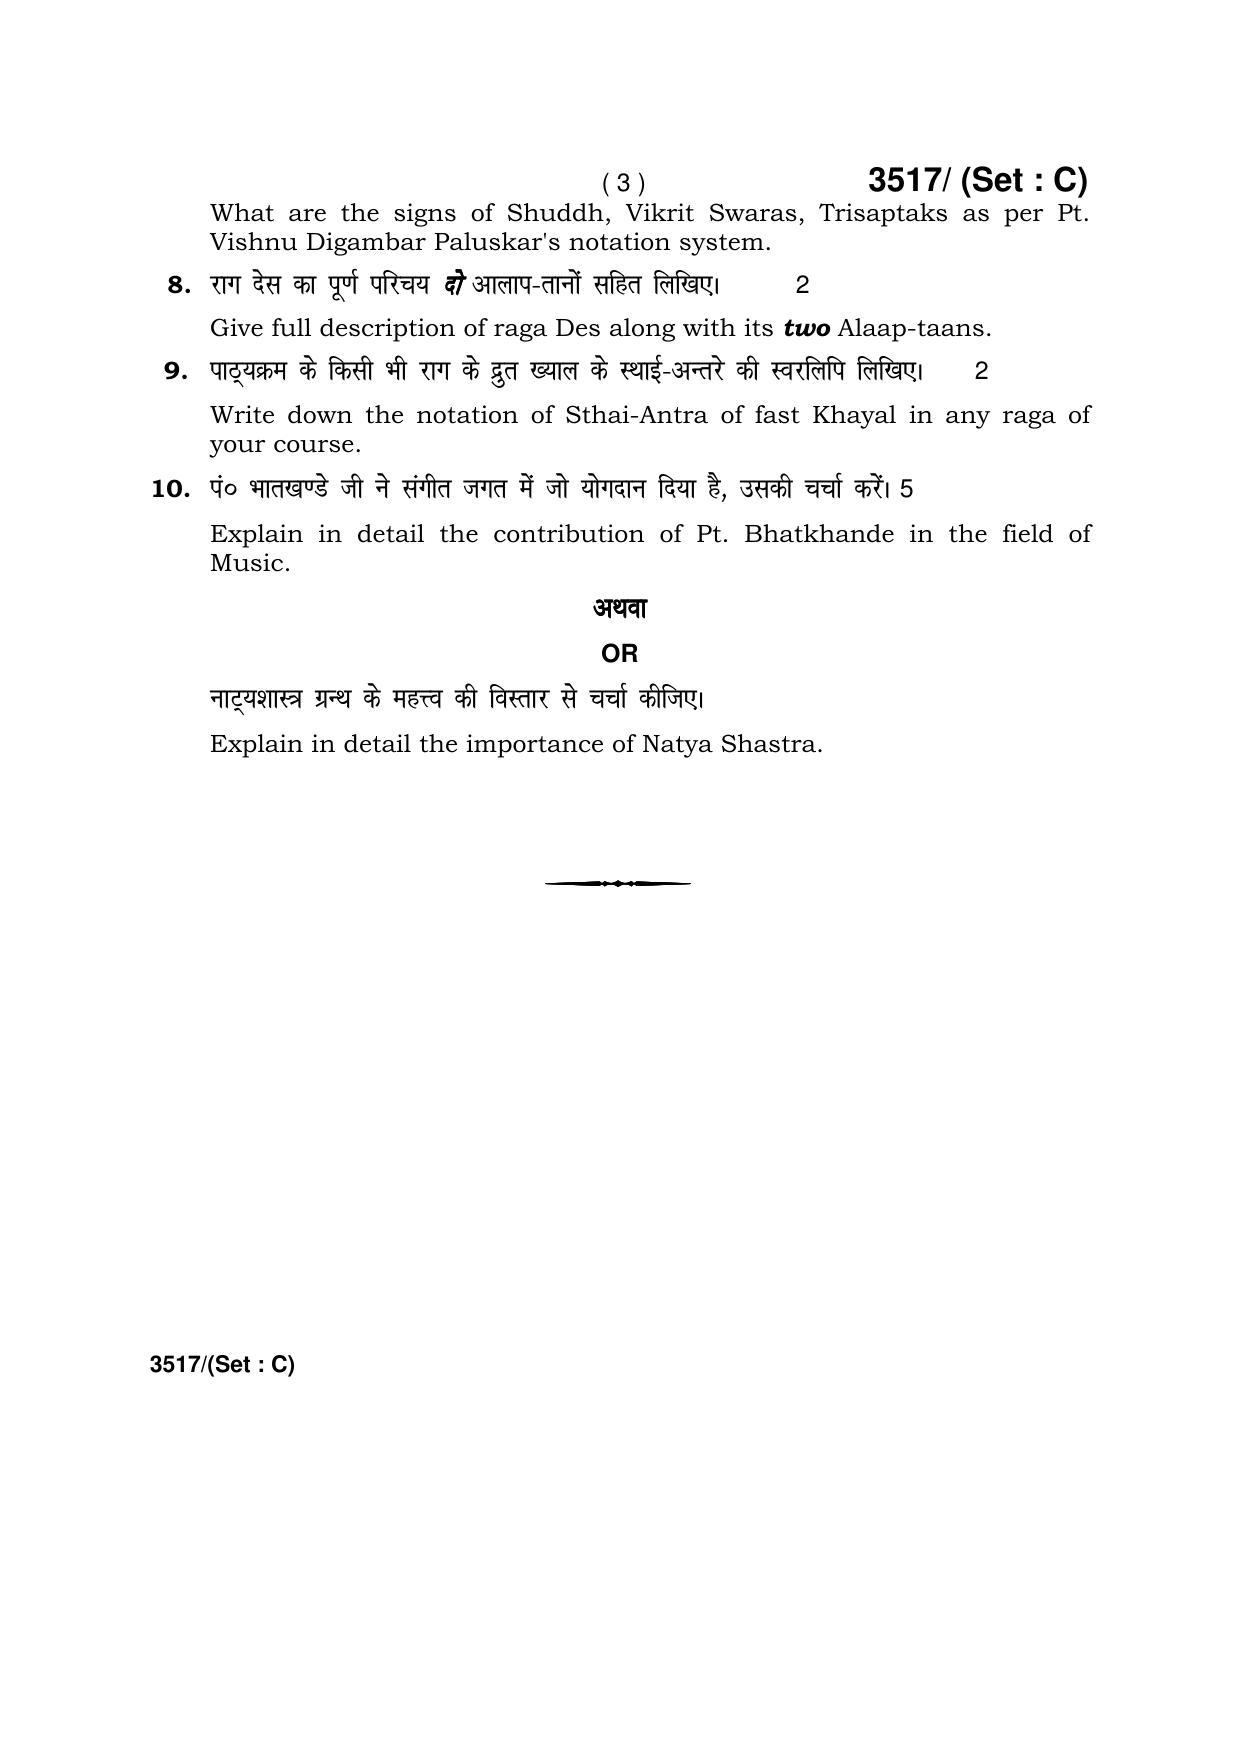 Haryana Board HBSE Class 10 Music Hindustani (Vocal) -C 2018 Question Paper - Page 3